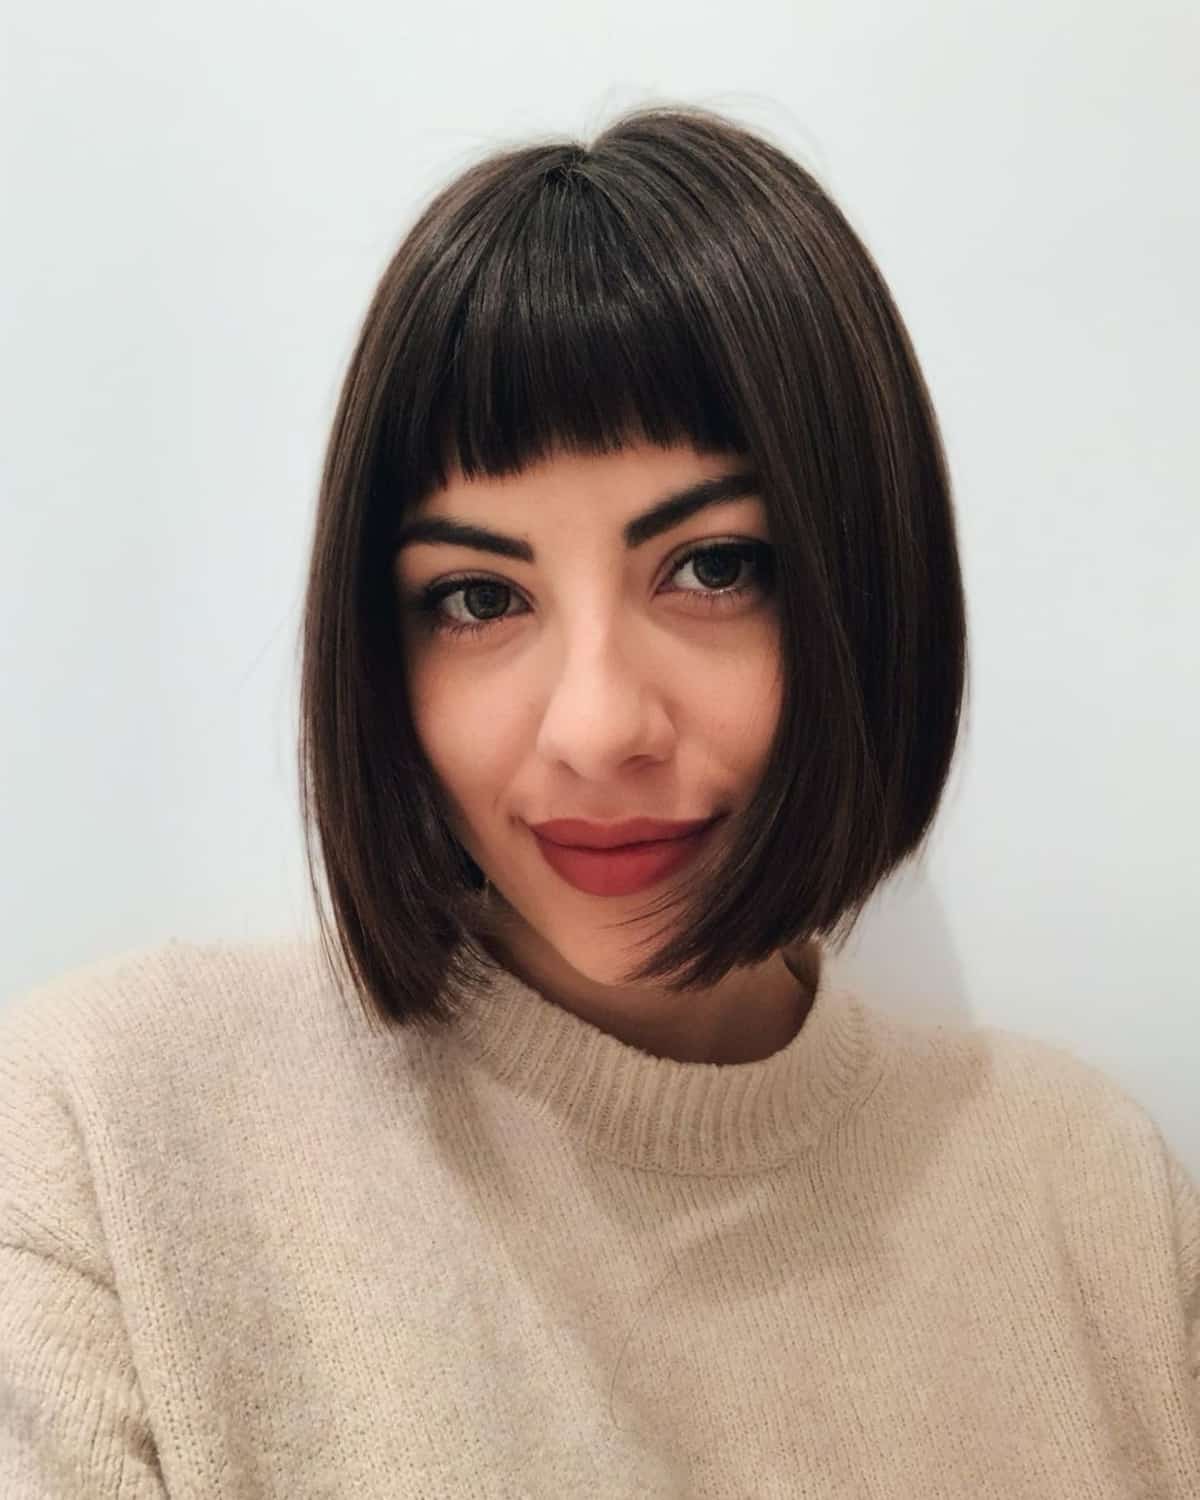 These 17 Blunt Cut Bob Haircuts at Totally Trending Right Now